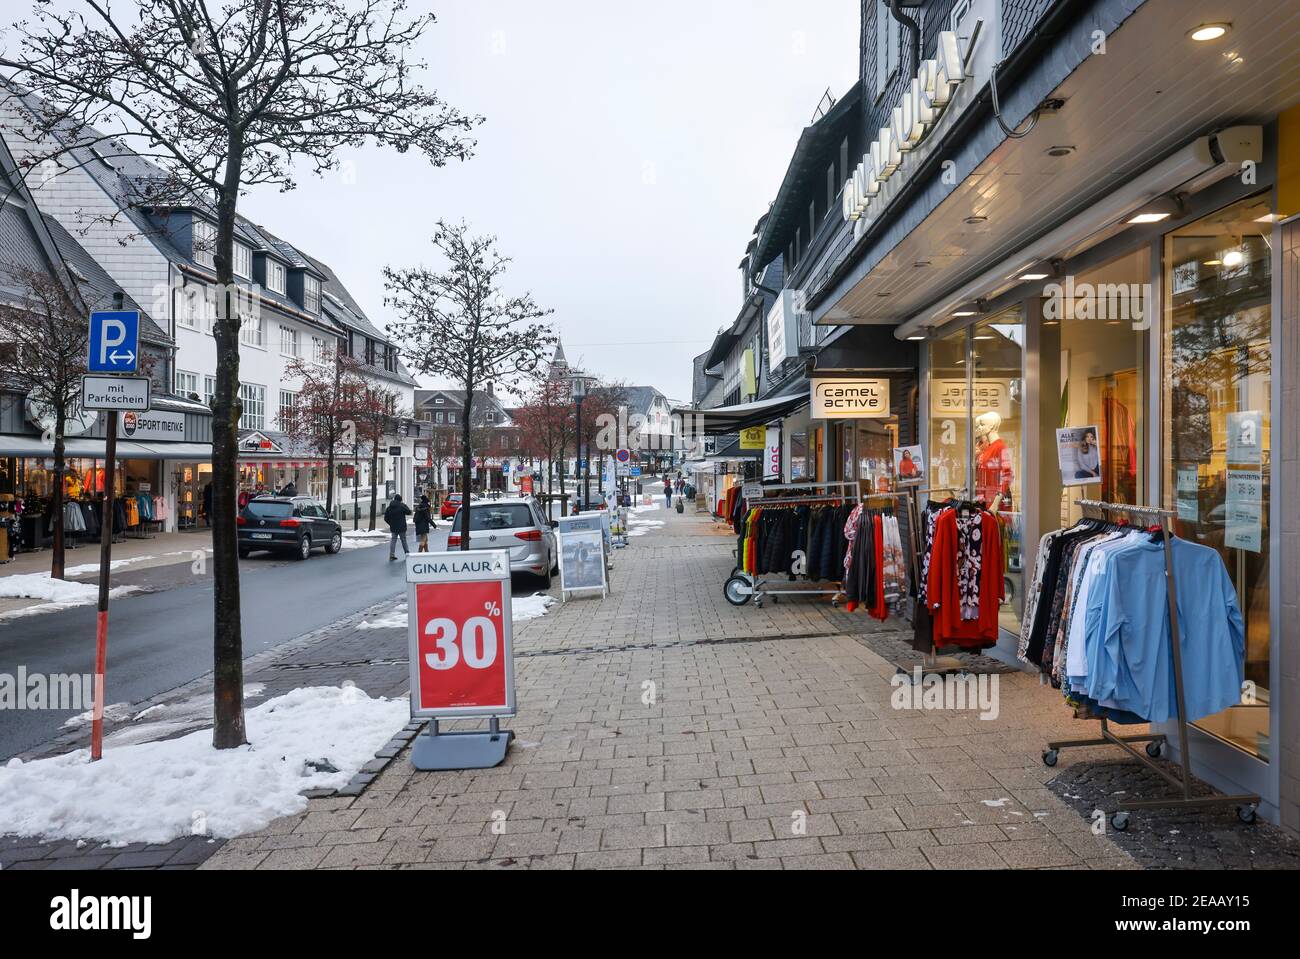 December 7th, 2020, Winterberg, Sauerland, North Rhine-Westphalia, Germany, Deserted shopping street, no winter sports in Winterberg in times of the corona crisis during the second part of the lockdown, ski lifts remain closed in accordance with the new Corona Protection Ordinance in NRW, the retail sector is suffering from the Corona Protection Ordinance. 00X201207D042CARO Stock Photo